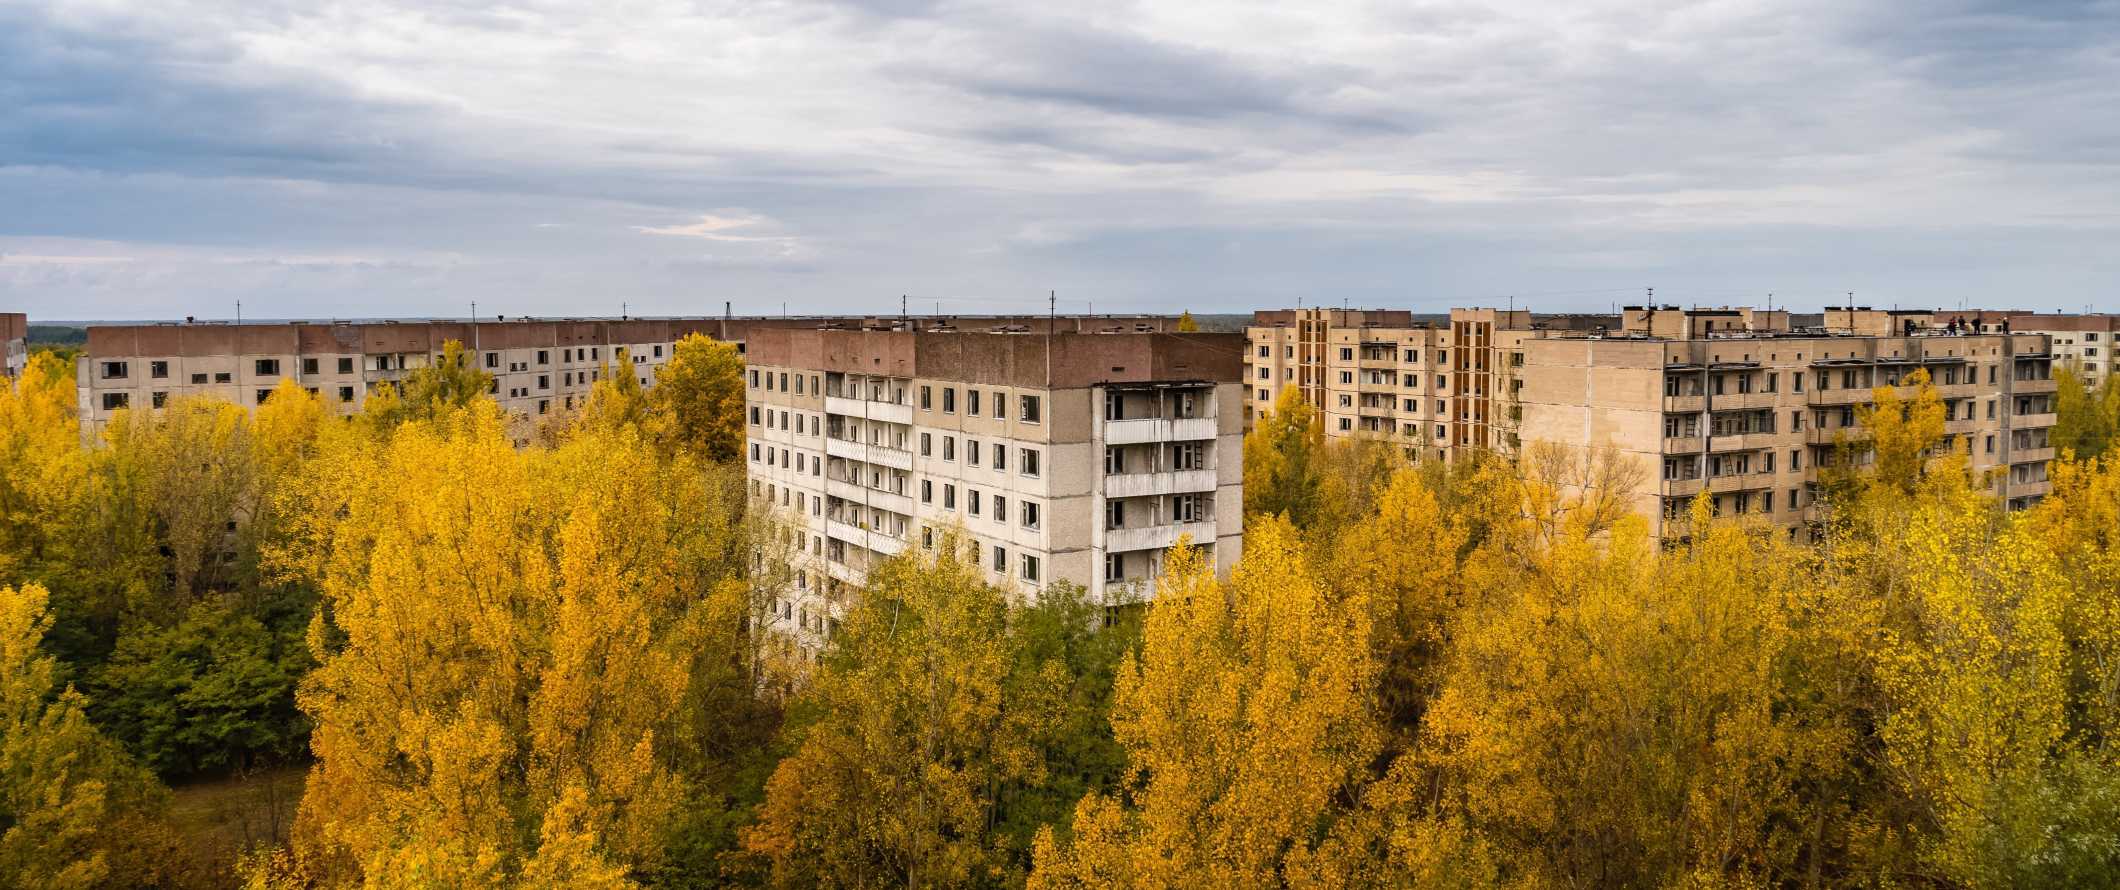 View over the abandoned apartment buildings with trees growing around them in Chernobyl, Ukraine